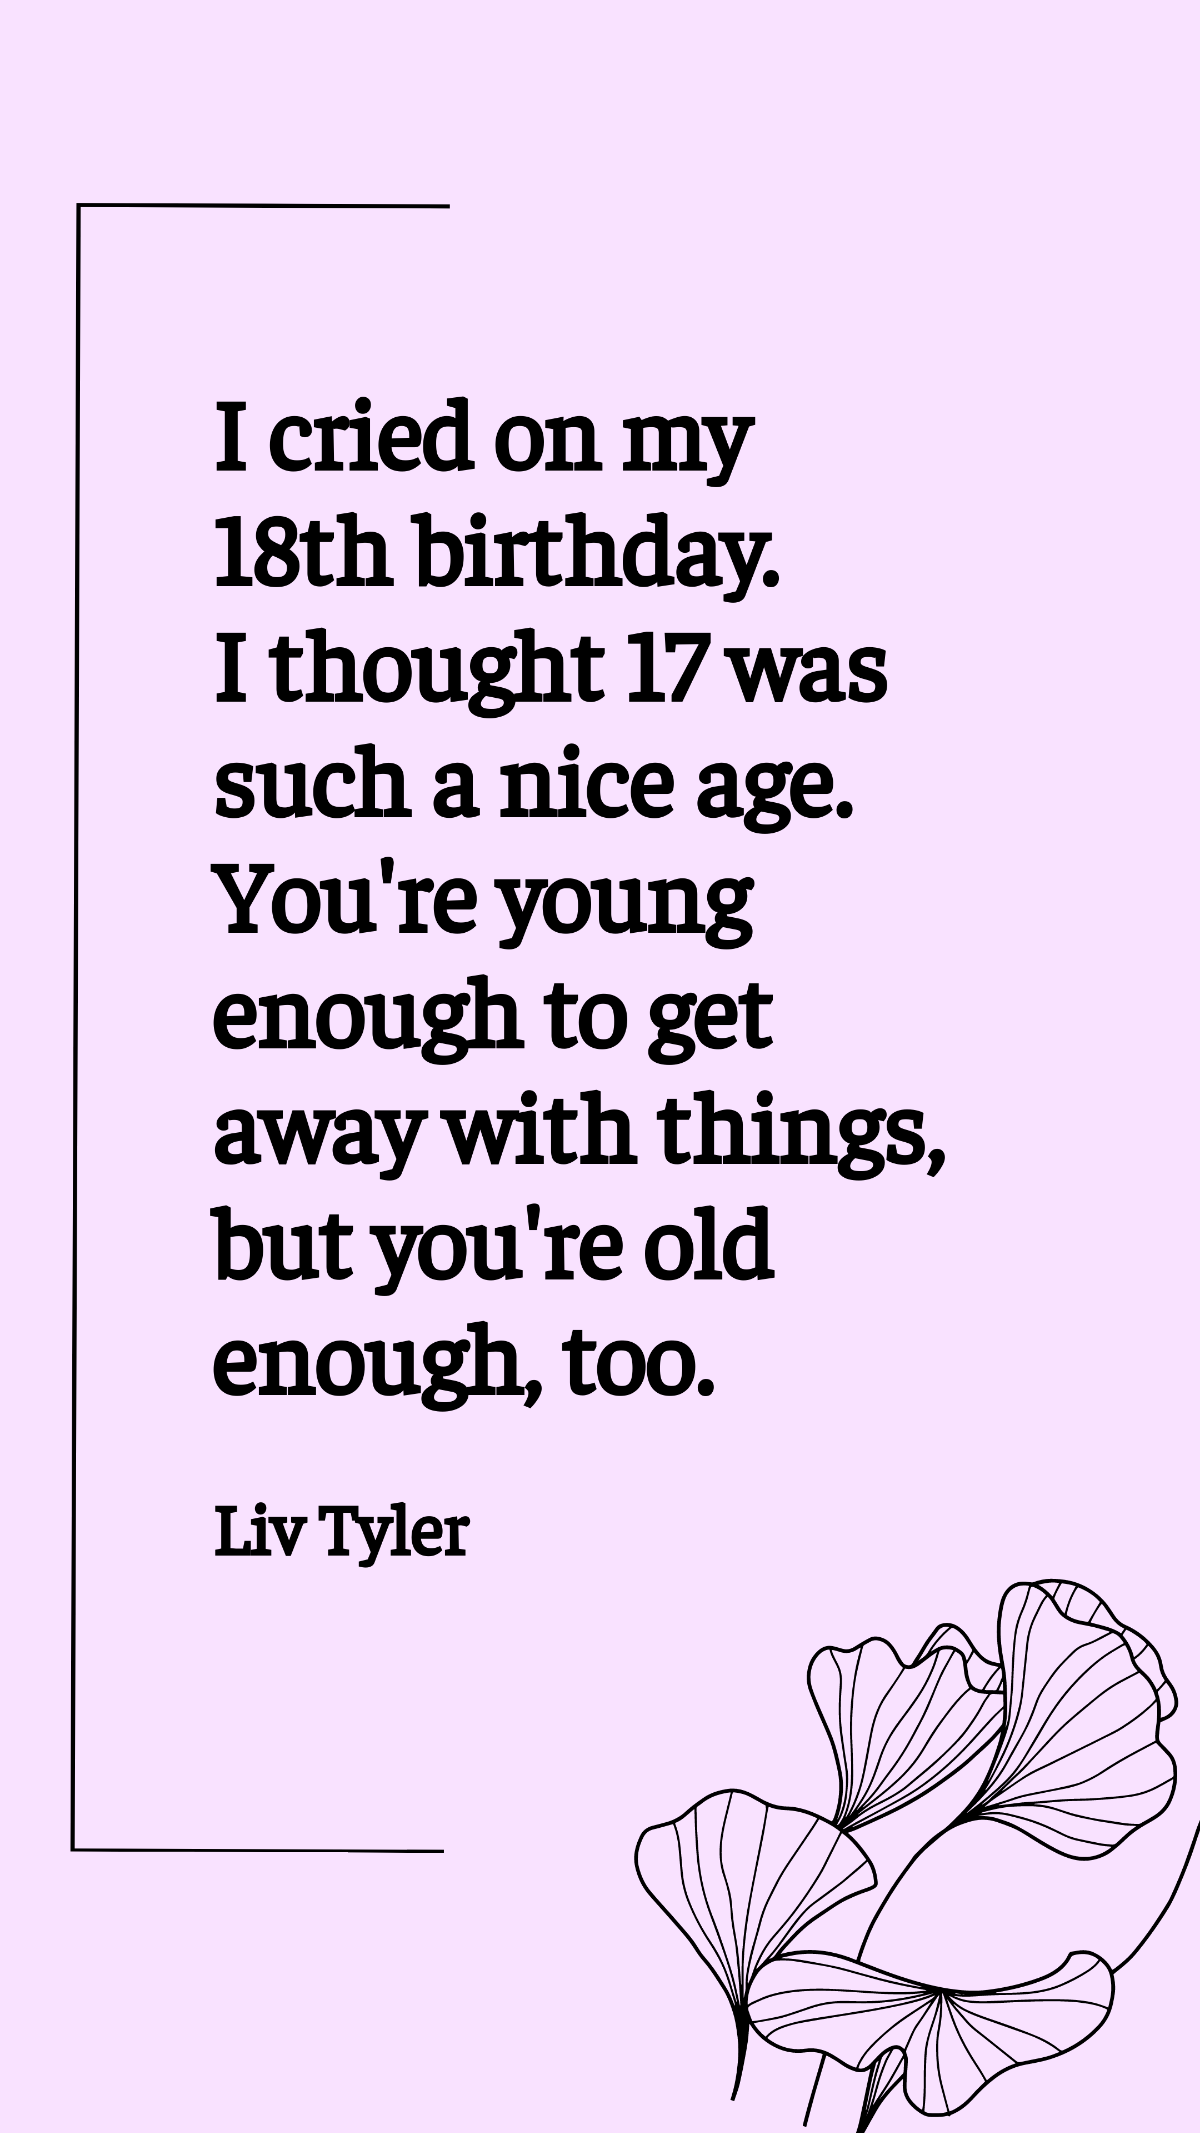 Liv Tyler - I cried on my 18th birthday. I thought 17 was such a nice age. You're young enough to get away with things, but you're old enough, too. Template